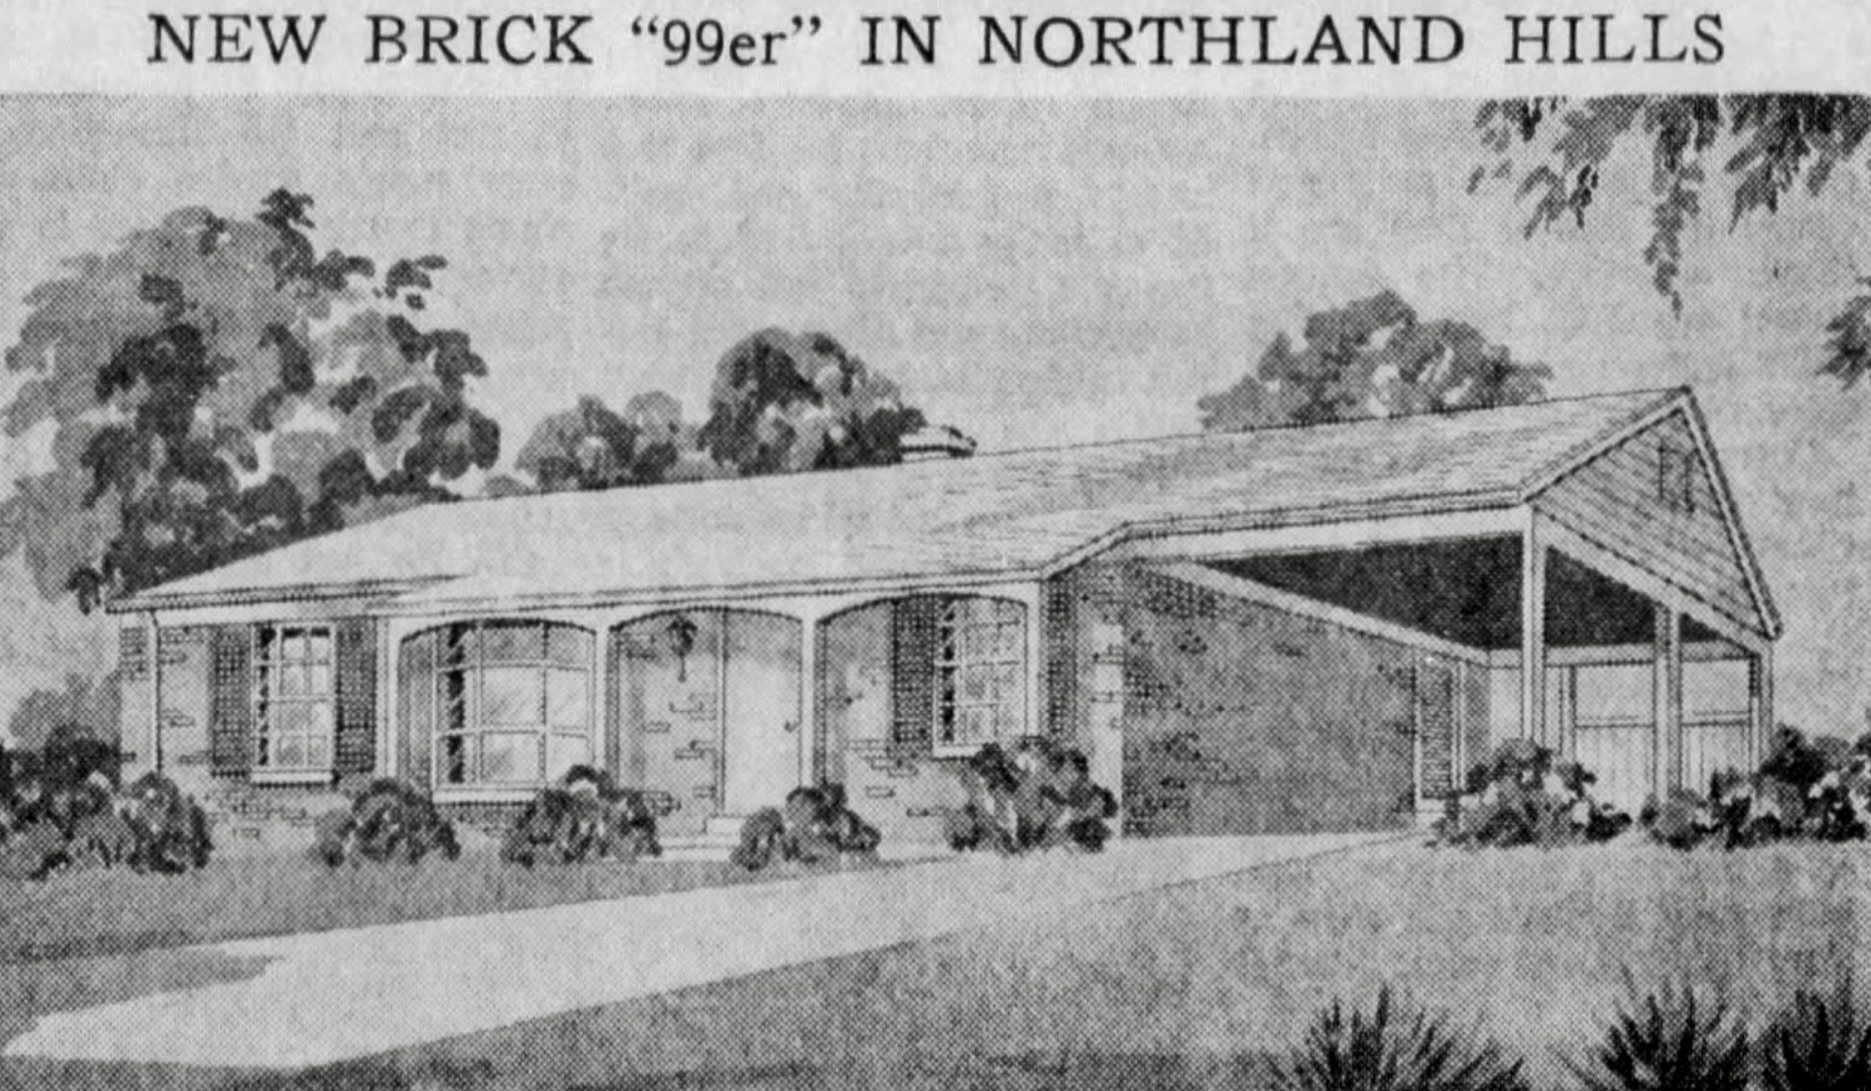 Northland Hills promotional ad for new brick 